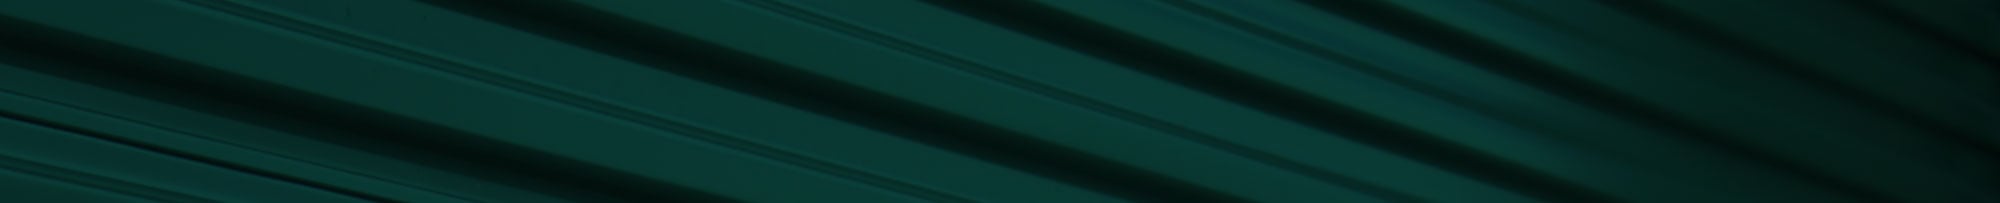 subpages_green_banner